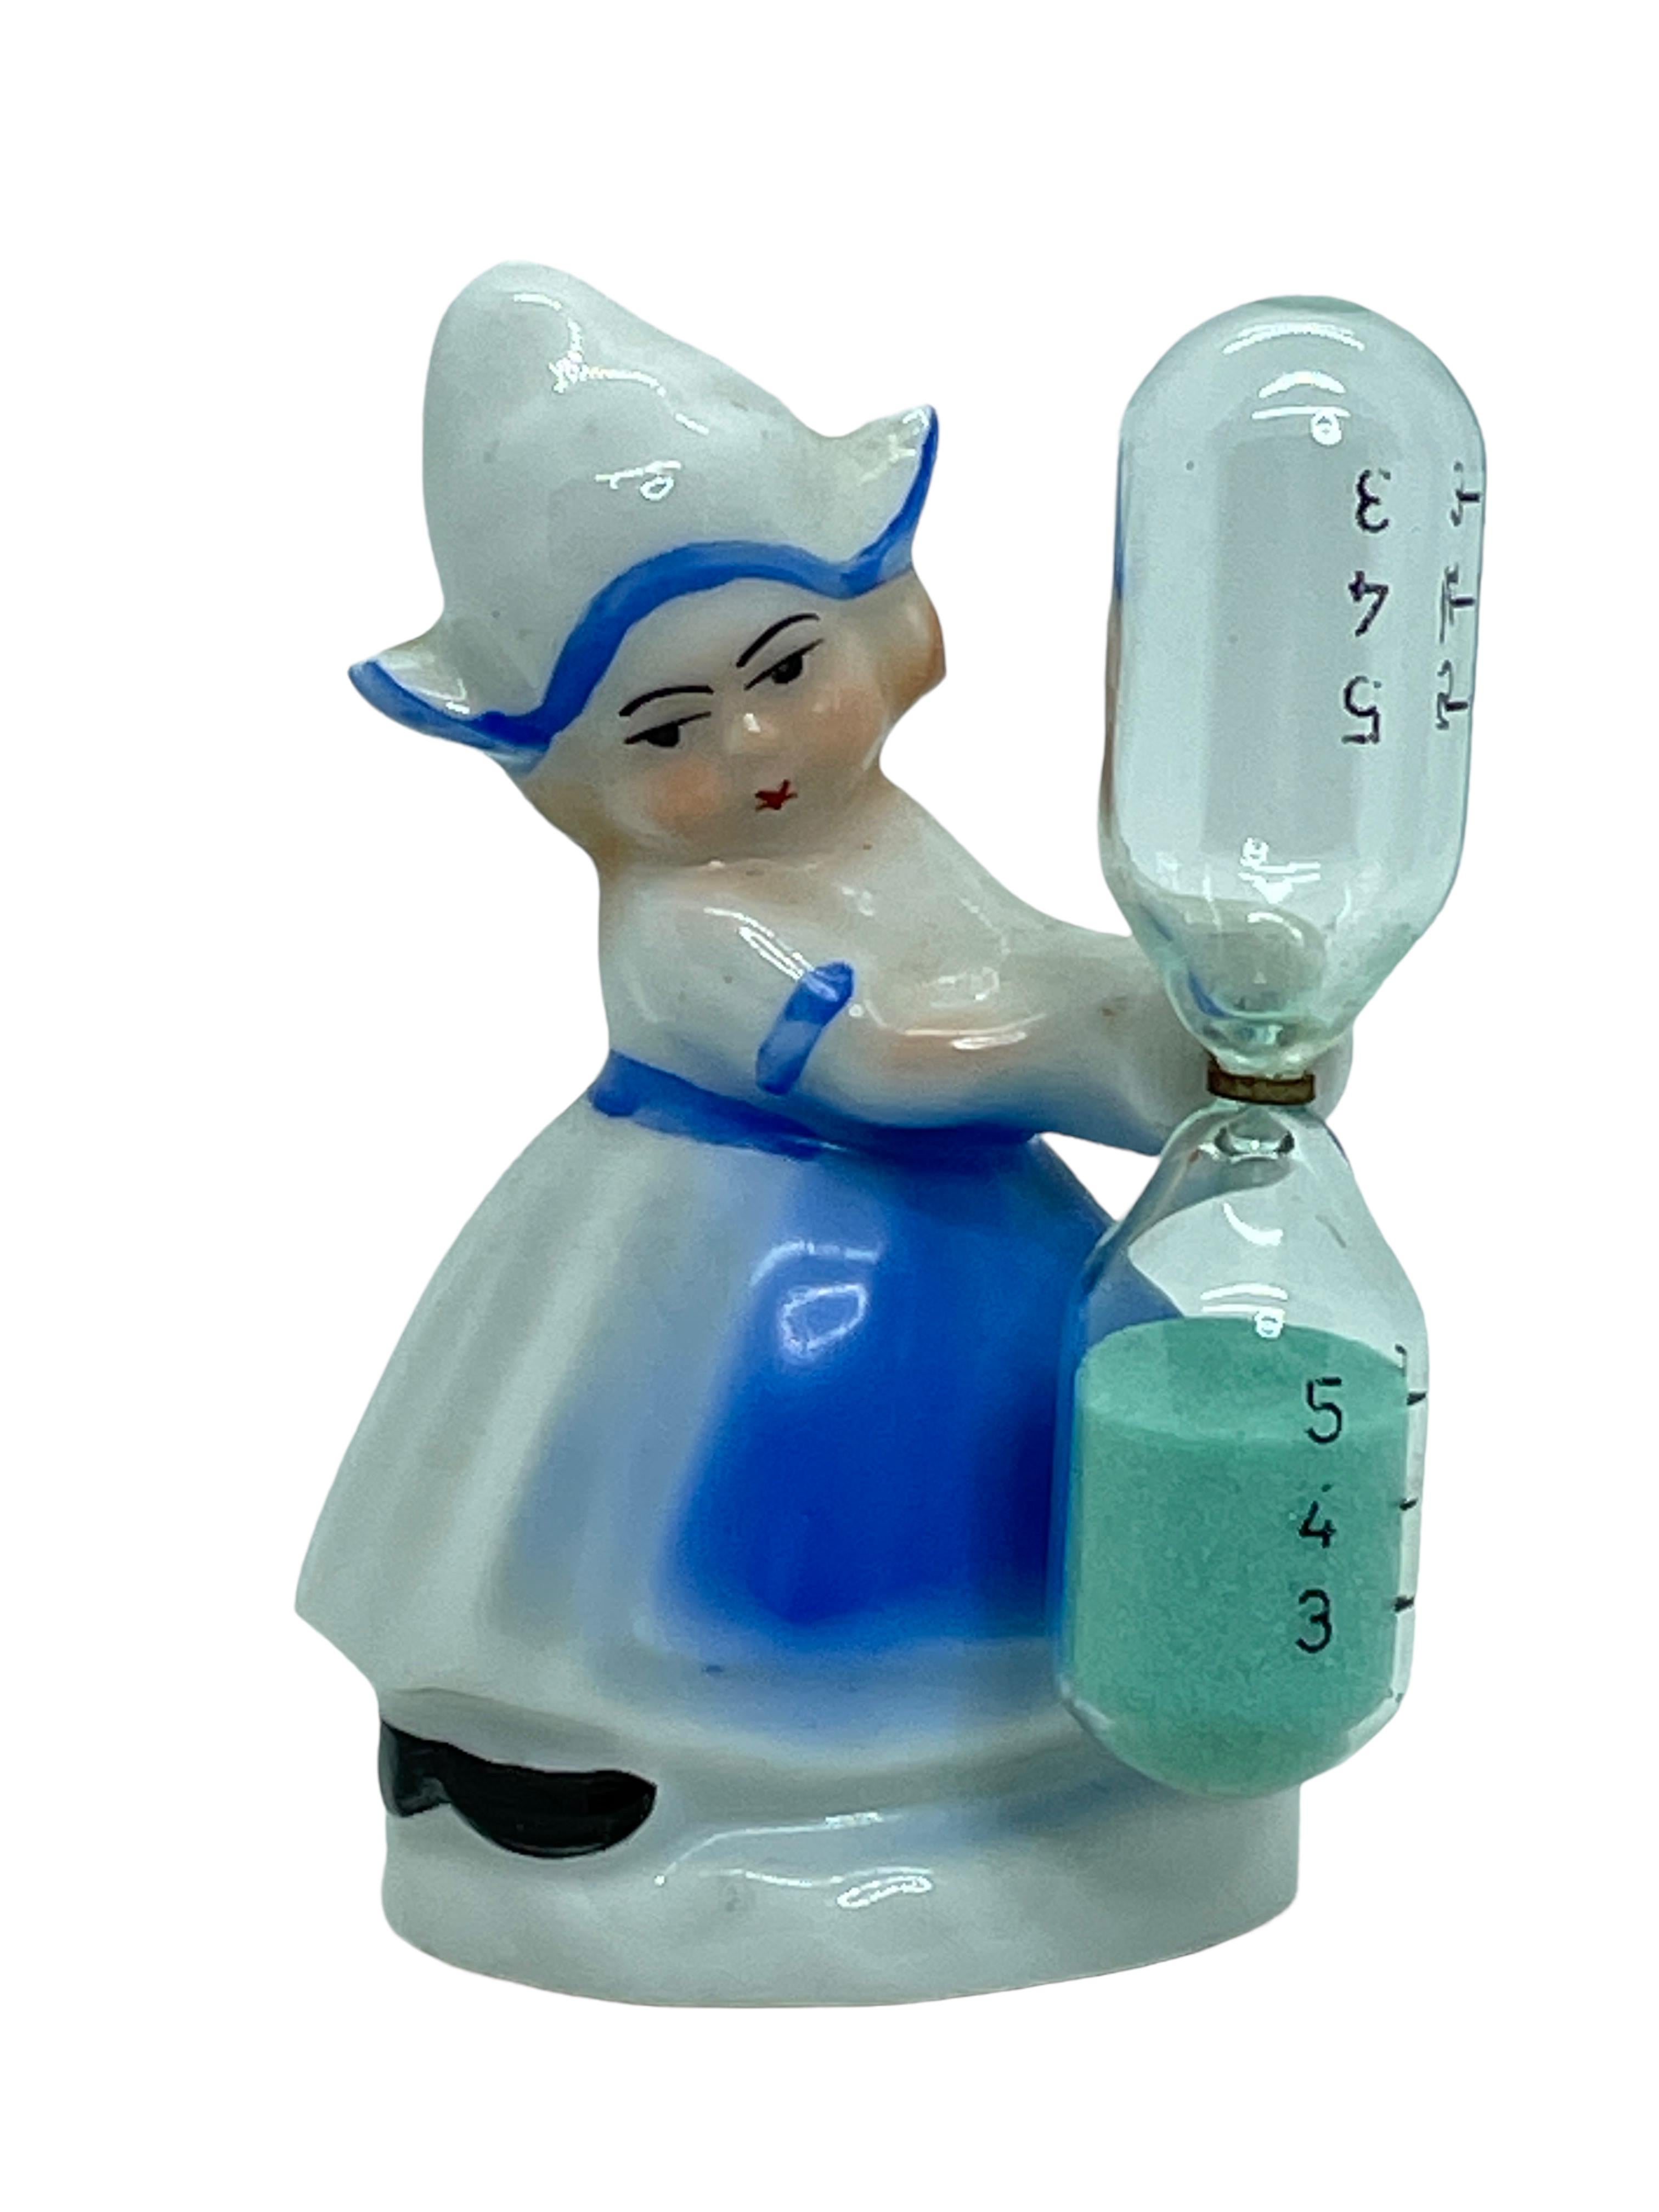 Beautiful girl figurine handmade in Germany circa 1900s- 1910s. A beautiful piece for decorating your kitchen. Handmade and hand painted in beautiful colors. Marked Germany.